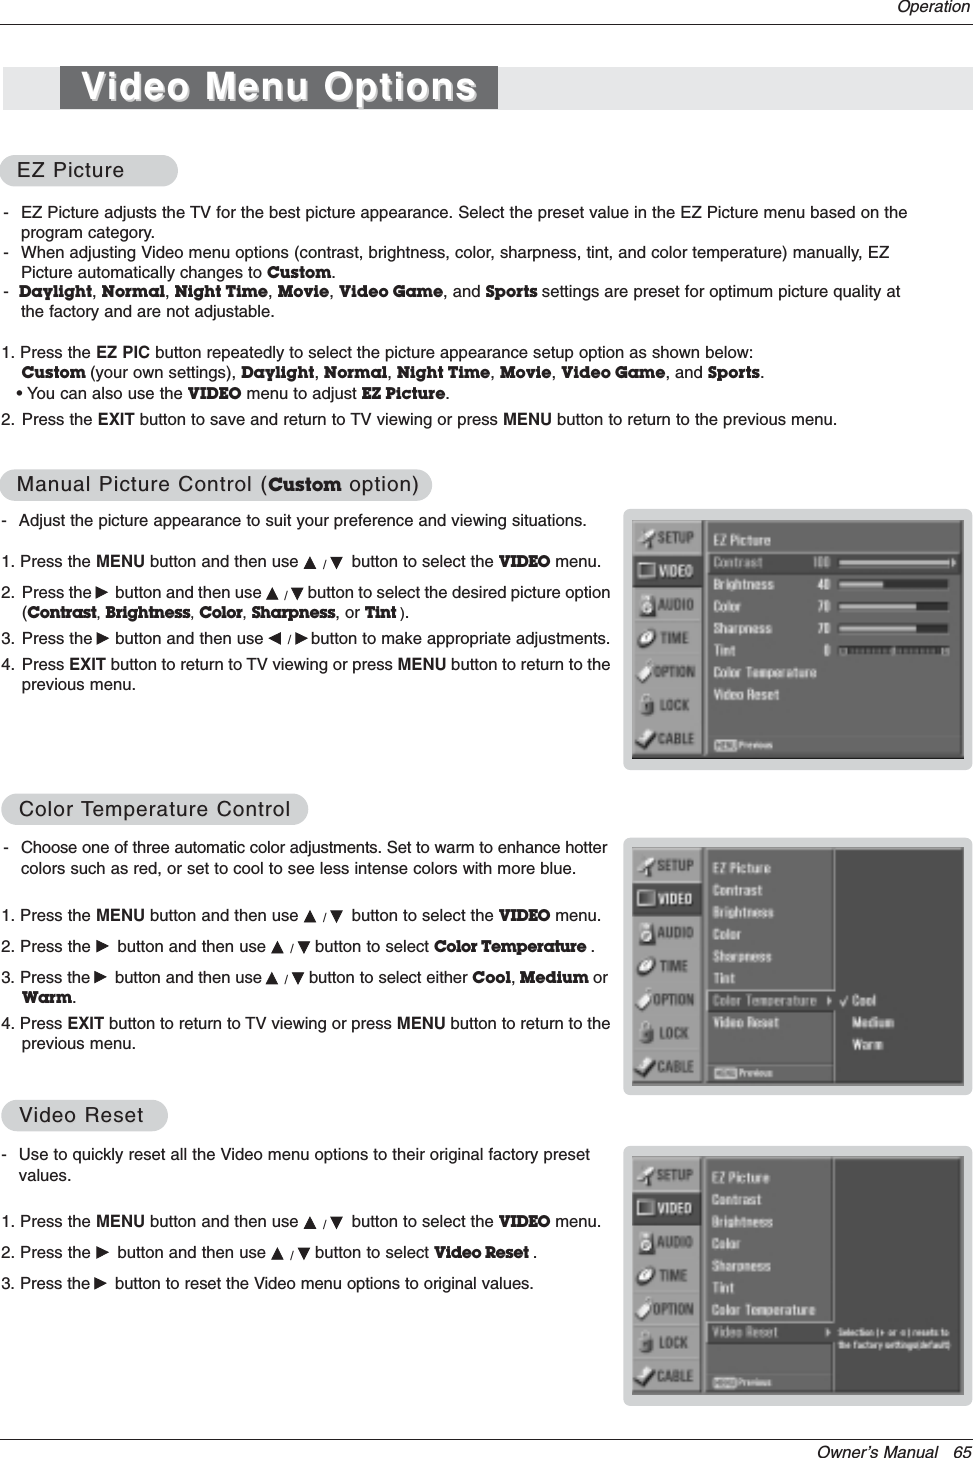 Owner’s Manual   65- Use to quickly reset all the Video menu options to their original factory presetvalues.1. Press the MENU button and then use D/Ebutton to select the VIDEO menu.2. Press the Gbutton and then use D/Ebutton to select Video Reset .3. Press the Gbutton to reset the Video menu options to original values.VVideo Resetideo ResetOperation- Adjust the picture appearance to suit your preference and viewing situations.1. Press the MENU button and then use D/Ebutton to select the VIDEO menu.2. Press the Gbutton and then use D/Ebutton to select the desired picture option(Contrast,Brightness,Color,Sharpness, or Tint ).3. Press the Gbutton and then use F/Gbutton to make appropriate adjustments.4. Press EXIT button to return to TV viewing or press MENU button to return to theprevious menu.1. Press the EZ PIC button repeatedly to select the picture appearance setup option as shown below:Custom (your own settings), Daylight,Normal,Night Time,Movie,Video Game, and Sports.• You can also use the VIDEO menu to adjust EZ Picture.2. Press the EXIT button to save and return to TV viewing or press MENU button to return to the previous menu. EZ PictureEZ PictureManual Picture Control (Manual Picture Control (Custom option)option)- Choose one of three automatic color adjustments. Set to warm to enhance hottercolors such as red, or set to cool to see less intense colors with more blue.1. Press the MENU button and then use D/Ebutton to select the VIDEO menu.2. Press the Gbutton and then use D/Ebutton to select Color Temperature .3. Press the Gbutton and then use D/Ebutton to select either Cool,Medium orWarm.4. Press EXIT button to return to TV viewing or press MENU button to return to theprevious menu.ColorColor TTemperature Controlemperature Control- EZ Picture adjusts the TV for the best picture appearance. Select the preset value in the EZ Picture menu based on theprogram category.- When adjusting Video menu options (contrast, brightness, color, sharpness, tint, and color temperature) manually, EZPicture automatically changes to Custom.-Daylight,Normal,Night Time,Movie,Video Game, and Sports settings are preset for optimum picture quality atthe factory and are not adjustable.VVideo Menu Optionsideo Menu Options